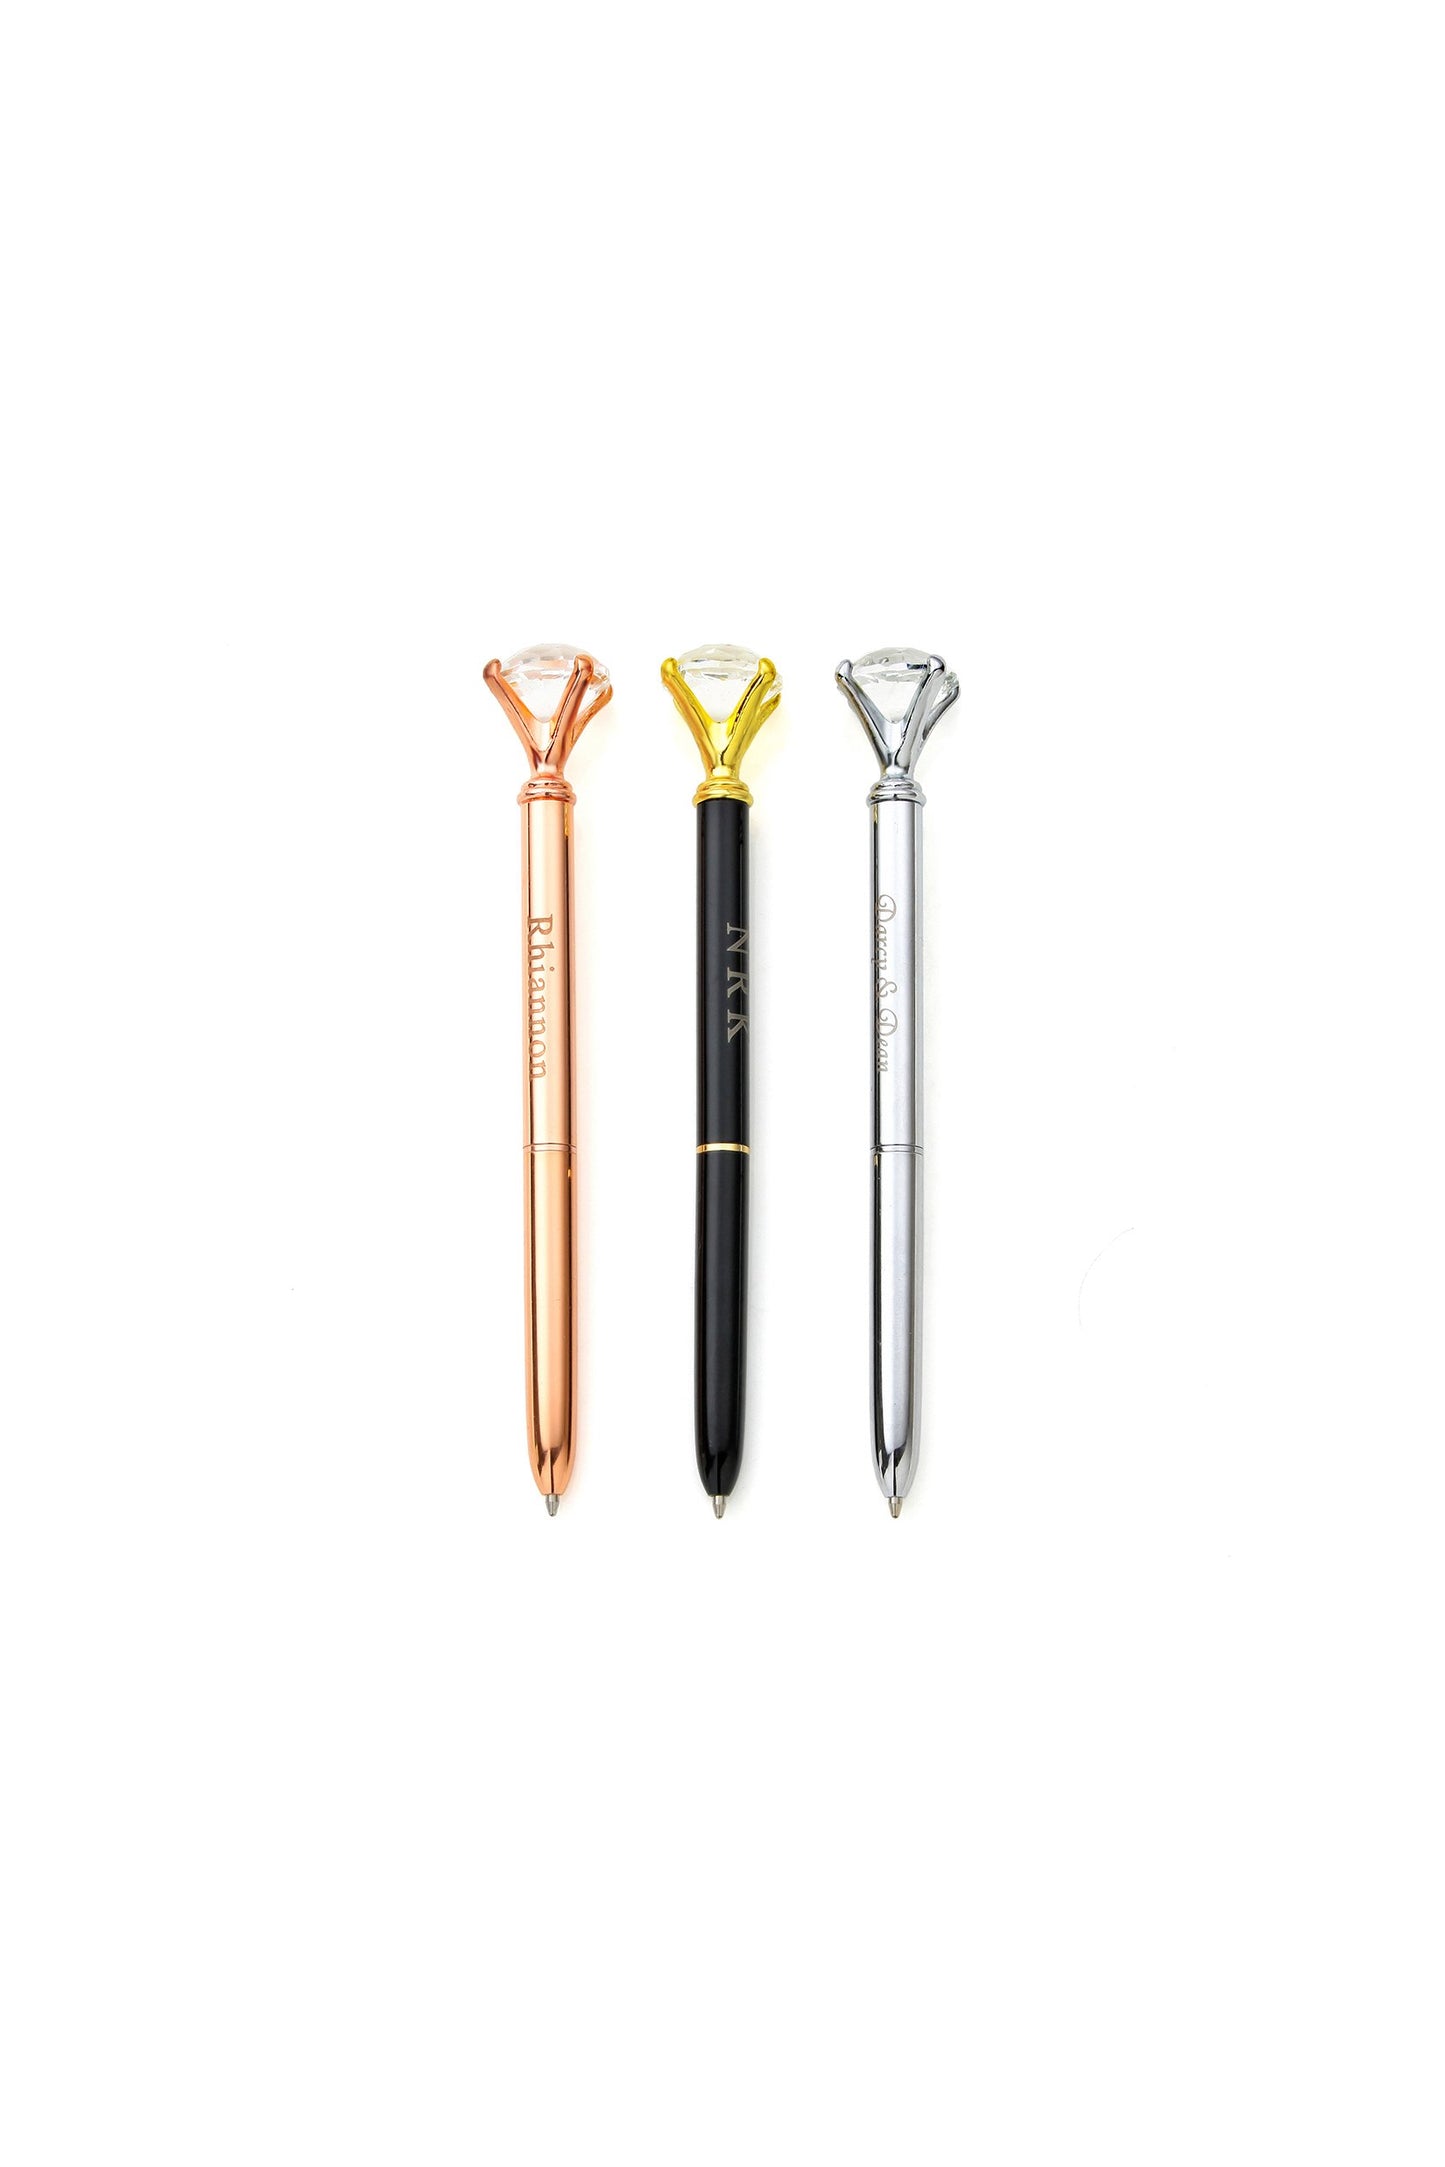 Like a Queen' Personalized Diamond Pens-6Pack CGF0002 (Set of 6 pcs)